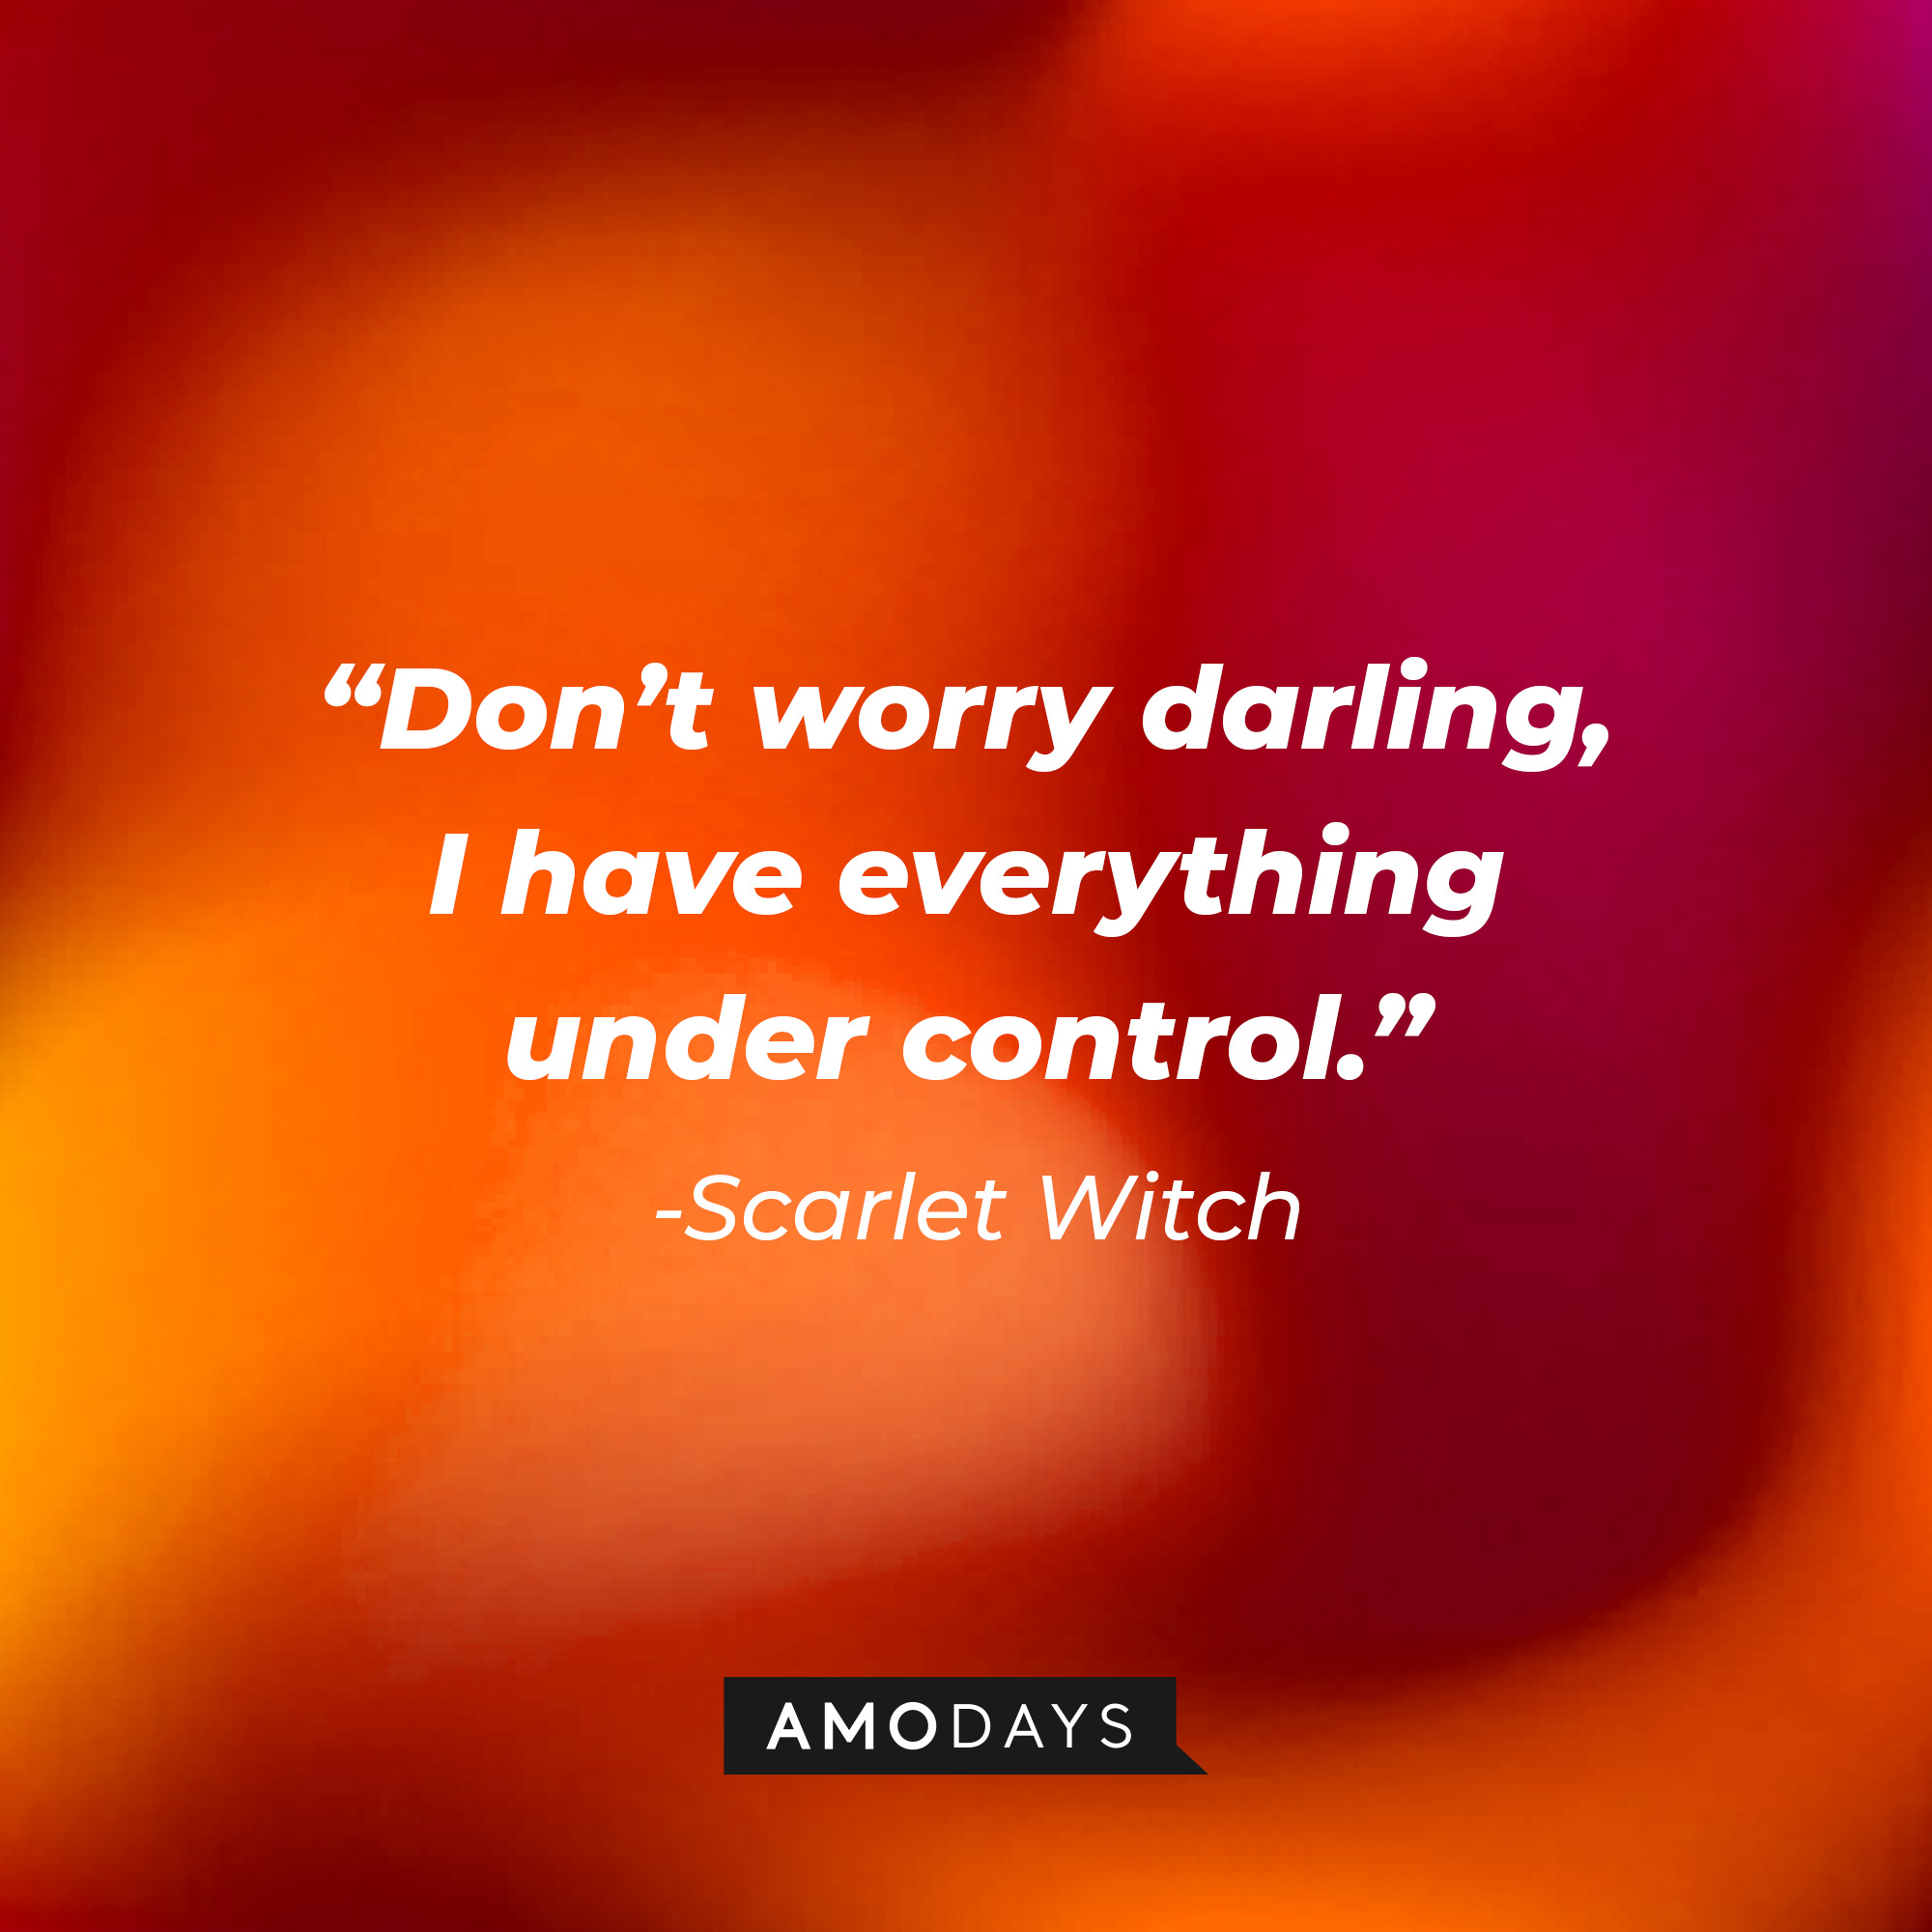 Scarlet Witch’s quote: “Don’t worry darling, I have everything under control.” | Source: AmoDays